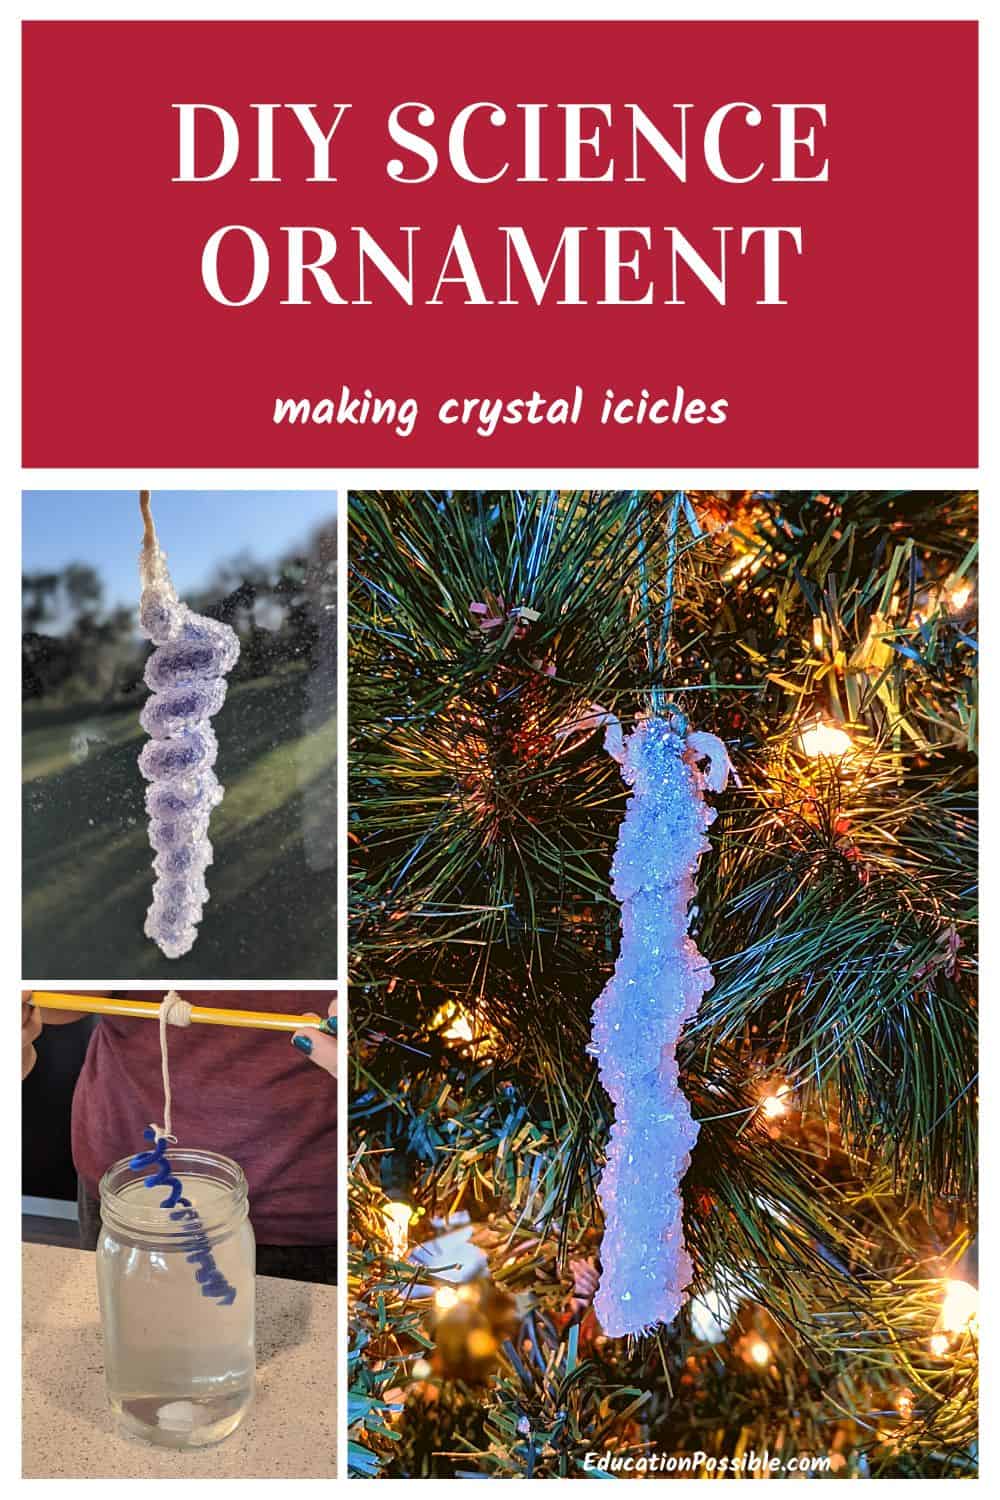 Making crystal icicle ornaments with borax. Hanging on Christmas tree.